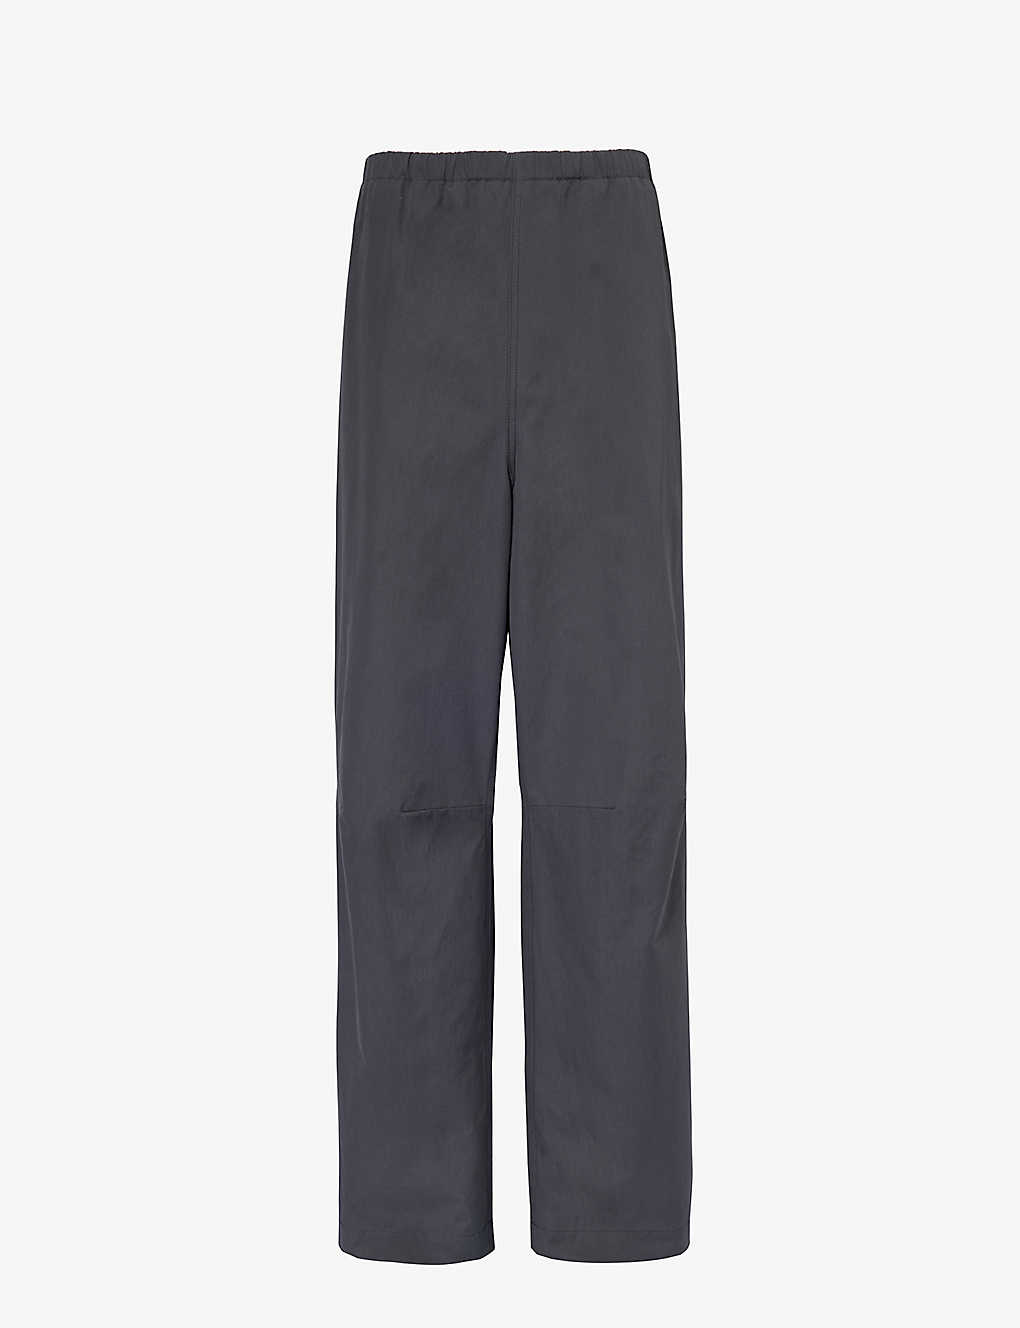 Gucci Mens Graphite Grey Skater Relaxed-fit Wide-leg Cotton Trousers